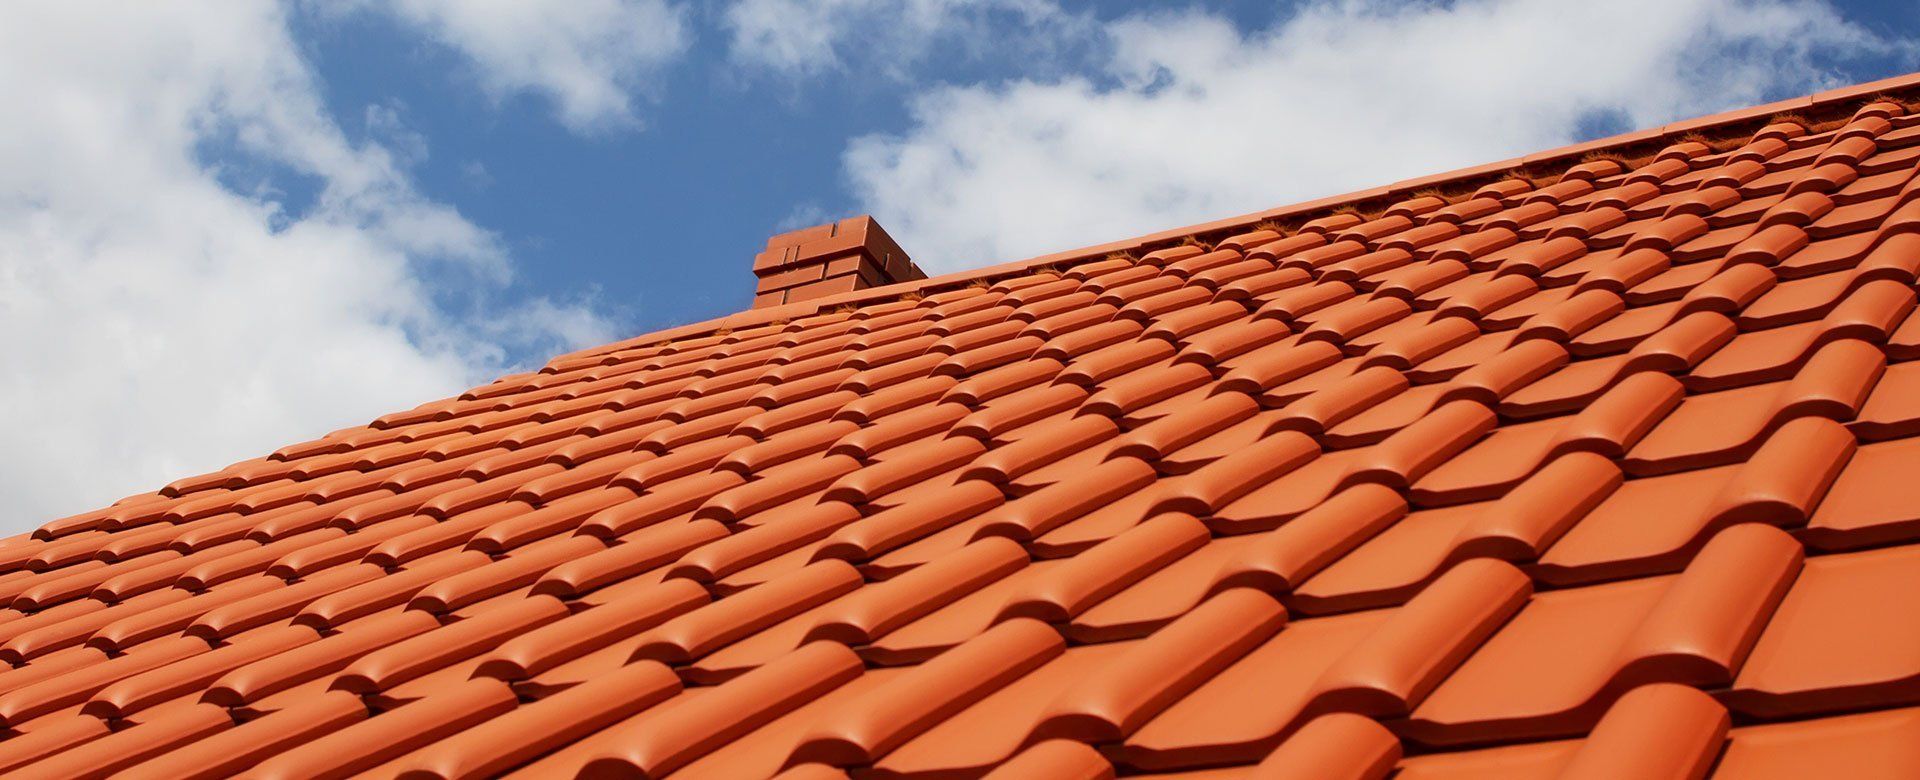 Red tiles roofing